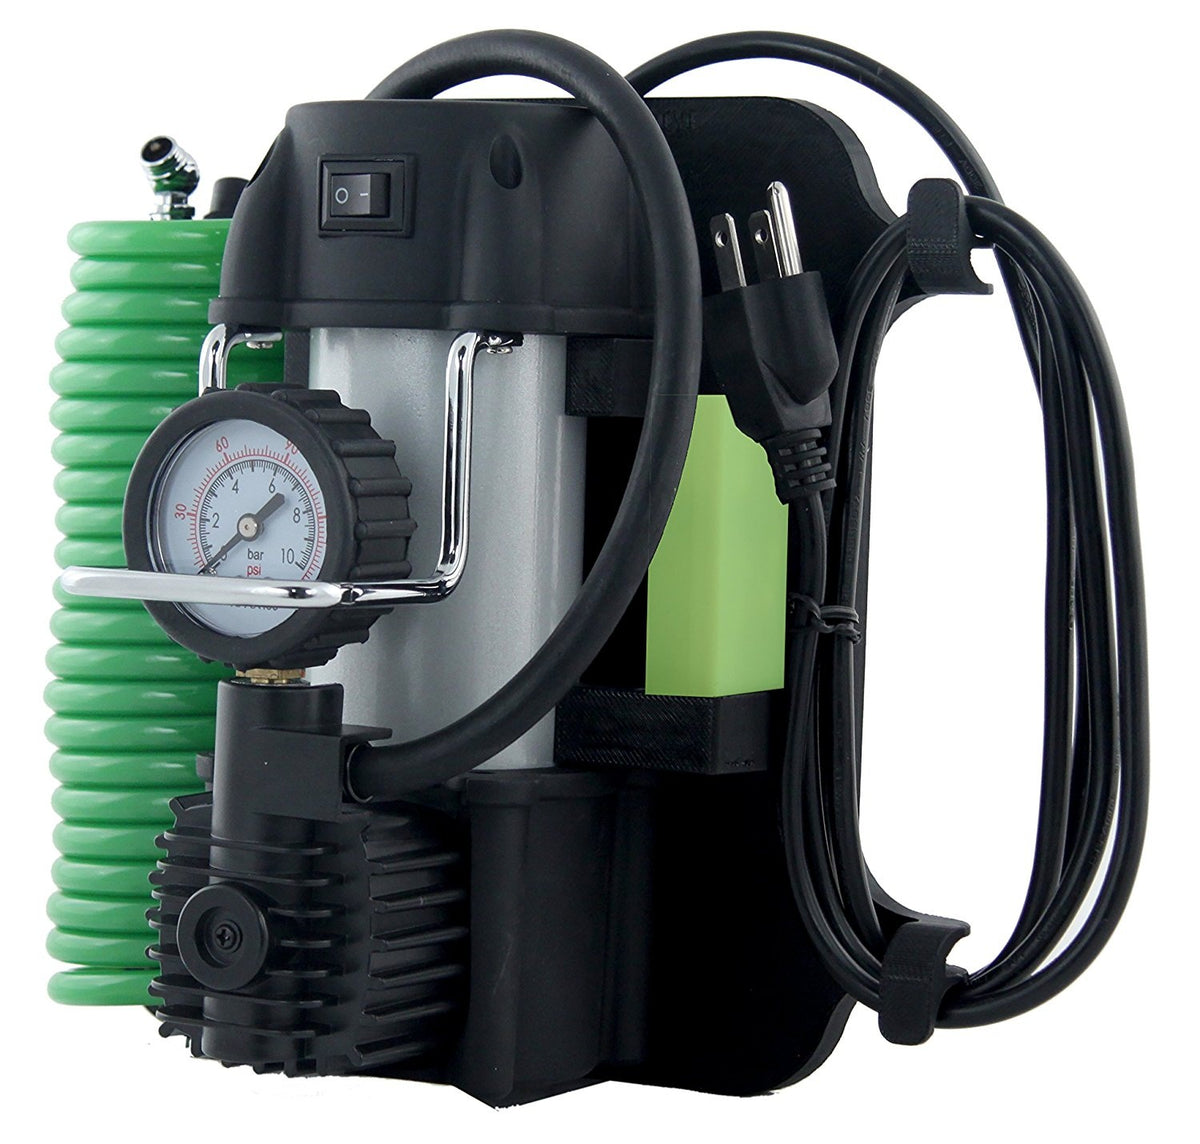 Buy slime 120v garage inflator 40045 - Online store for automotive, compressors / inflators in USA, on sale, low price, discount deals, coupon code